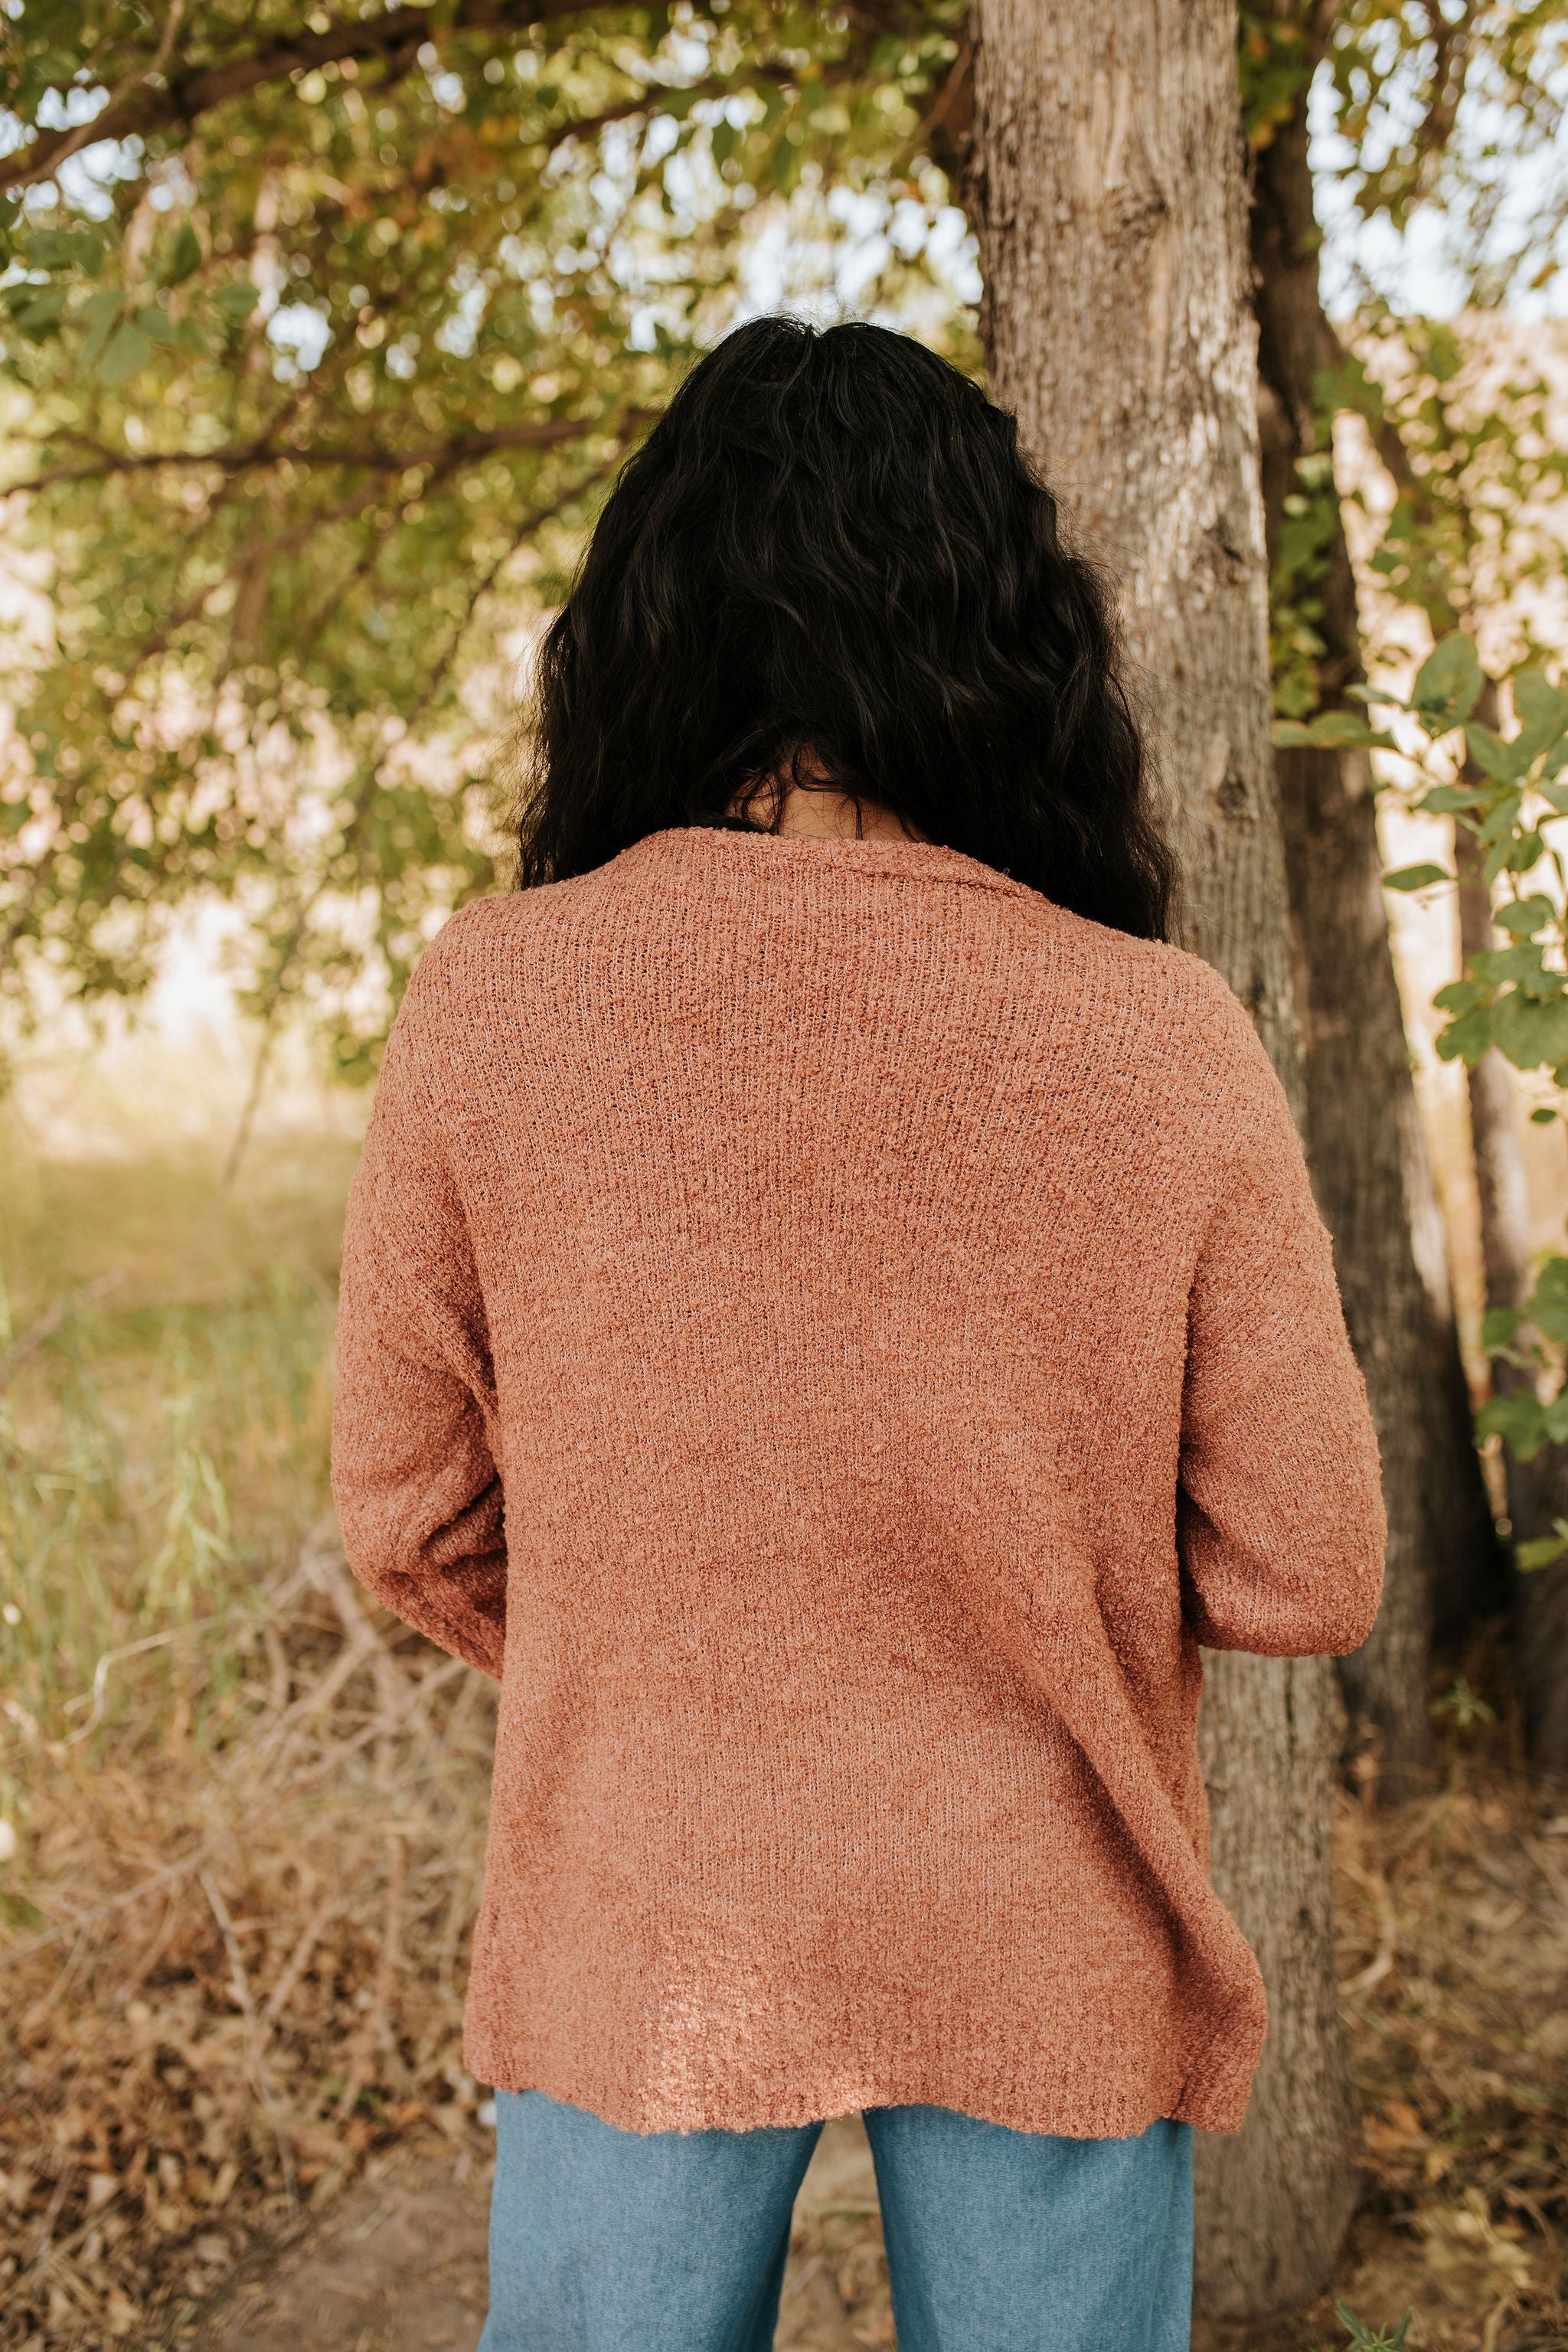 THE ADORE YOU CARDIGAN IN CLAY – Pink Desert